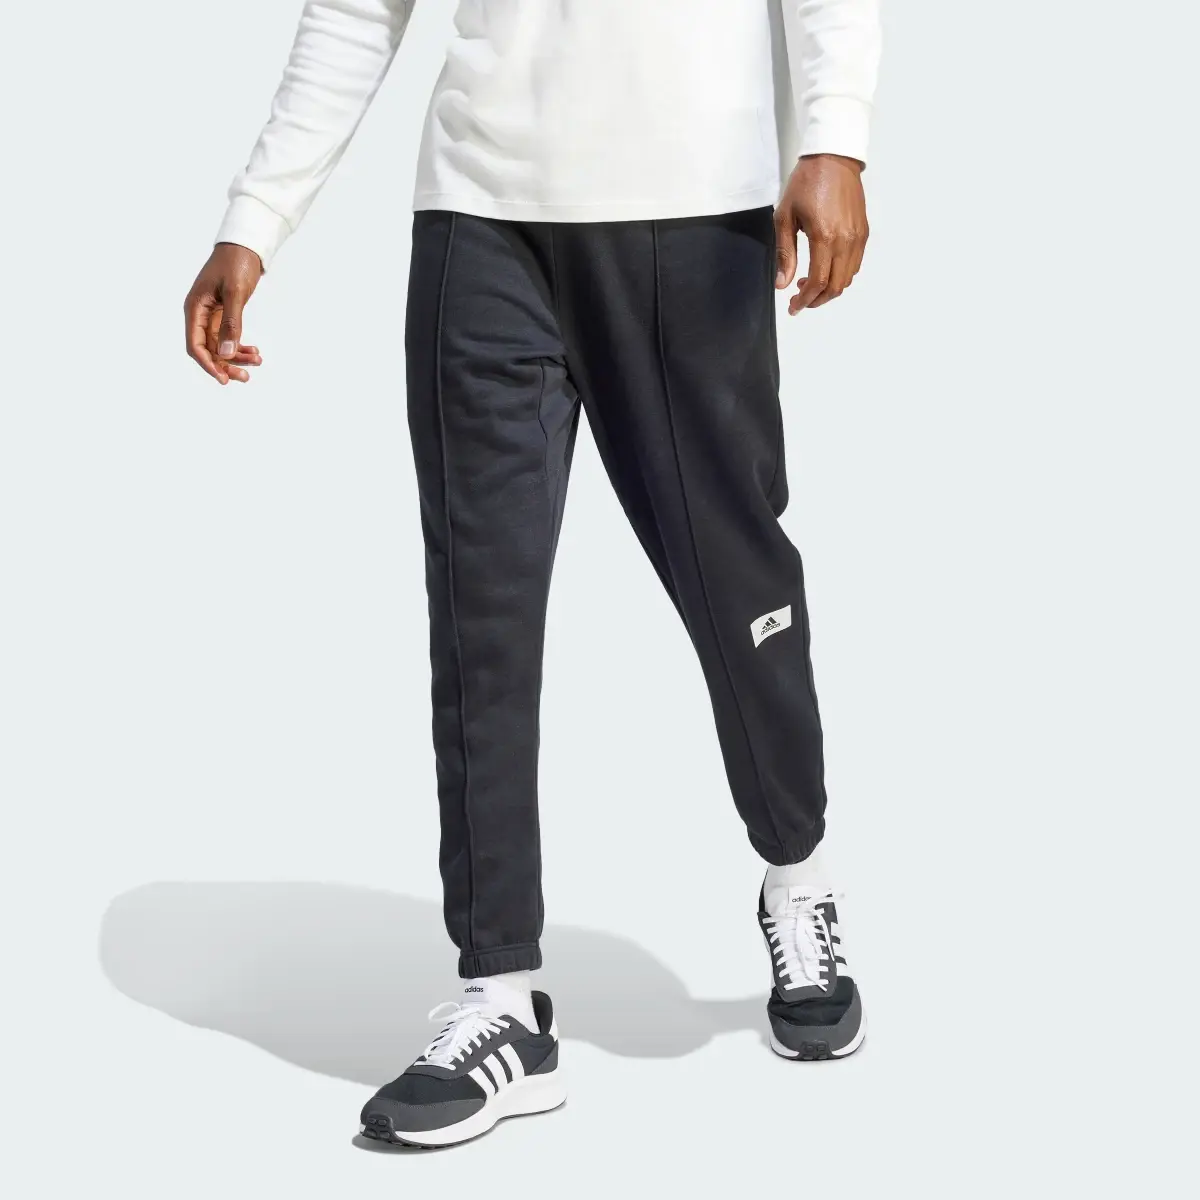 Adidas The Safe Place Joggers. 1